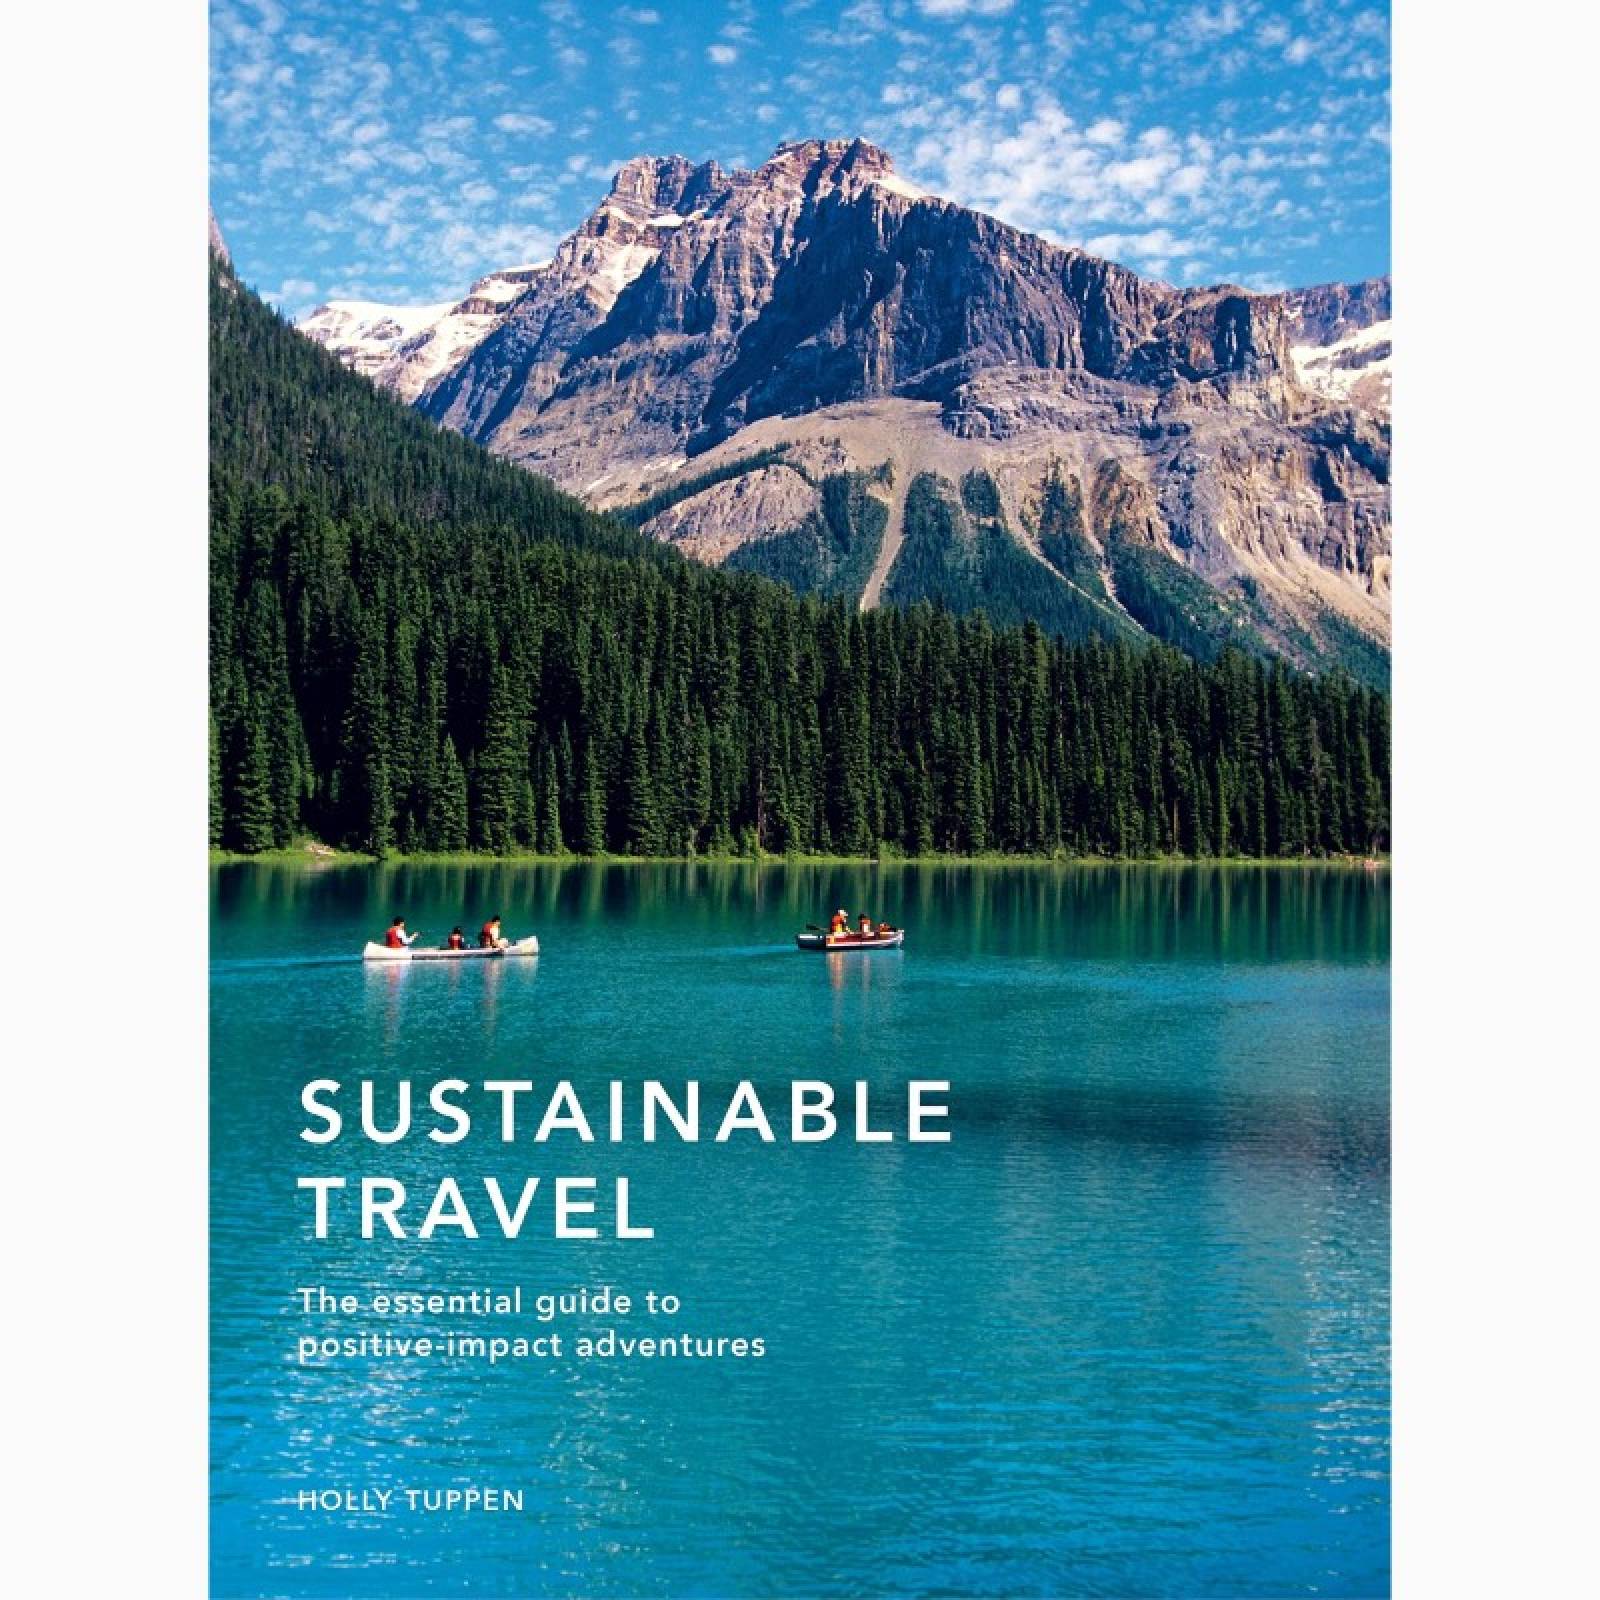 Sustainable Travel By Holly Tuppen - Hardback Book thumbnails